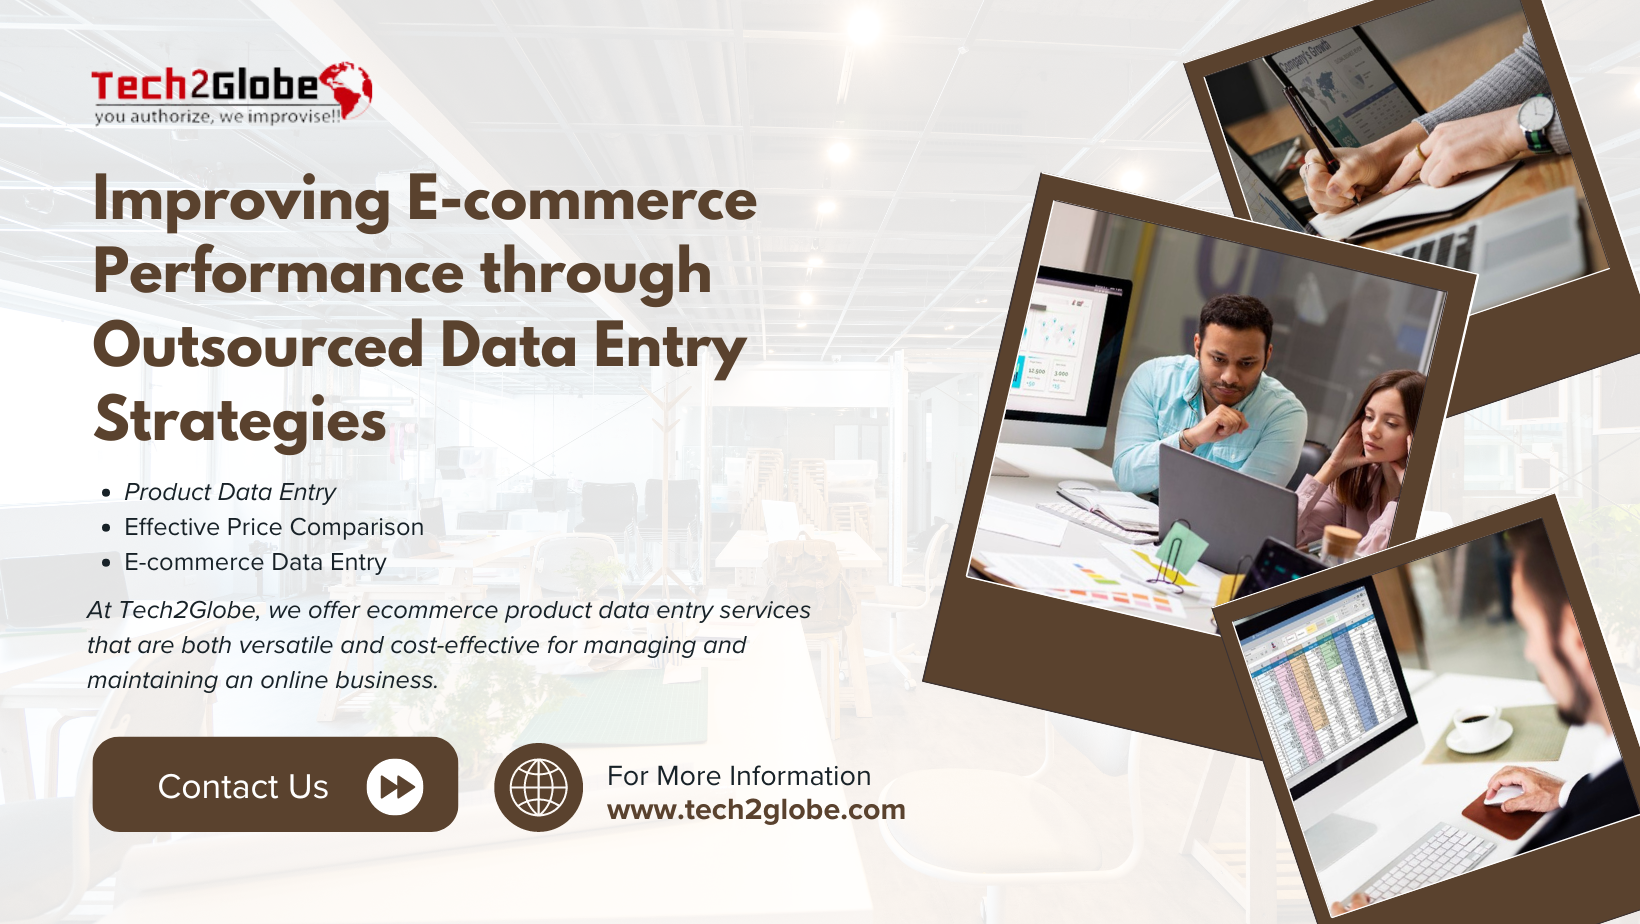 Improving E-commerce Performance through Outsourced Data Entry Strategies